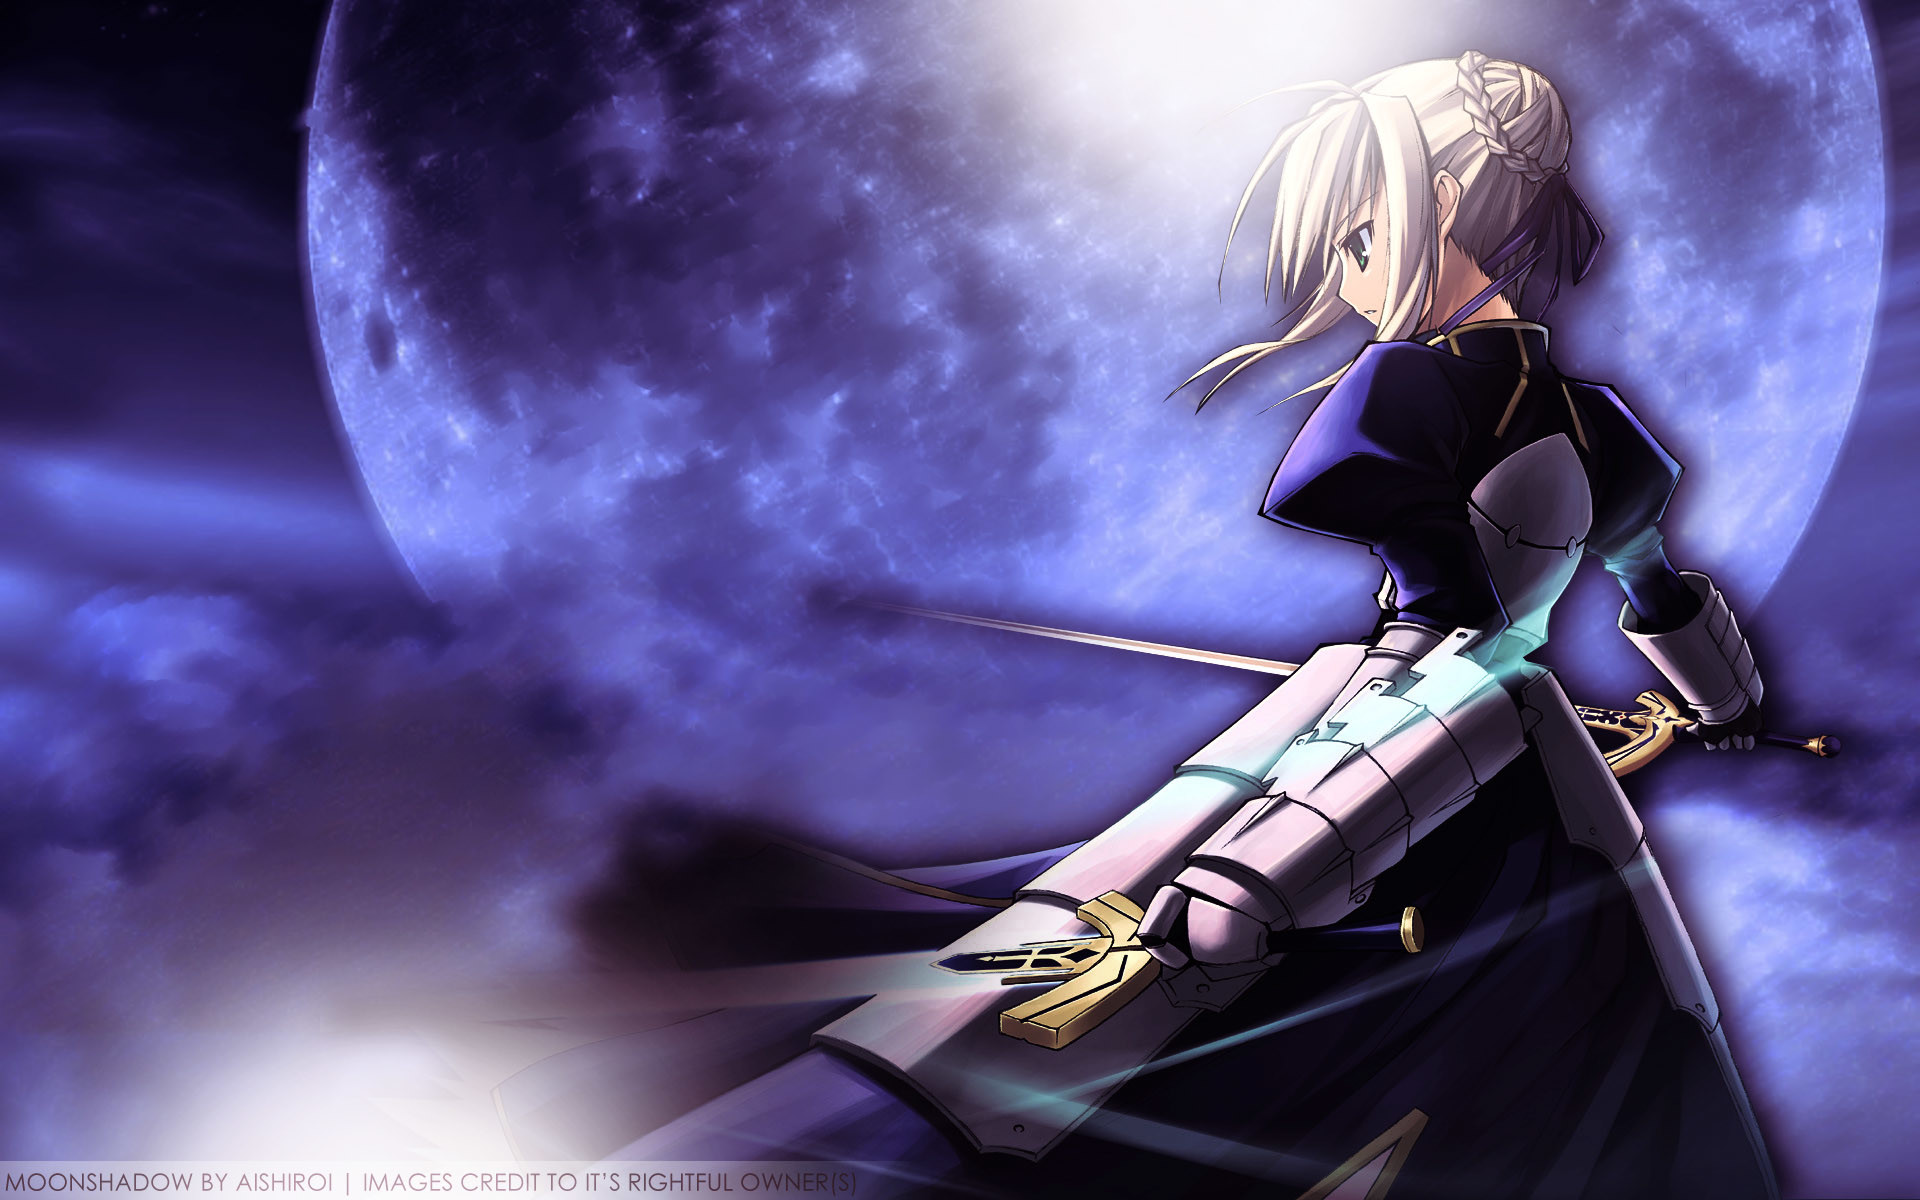 1920x1200 HD Wallpaper and background photos of Saber for fans of Fate Stay Night  images.